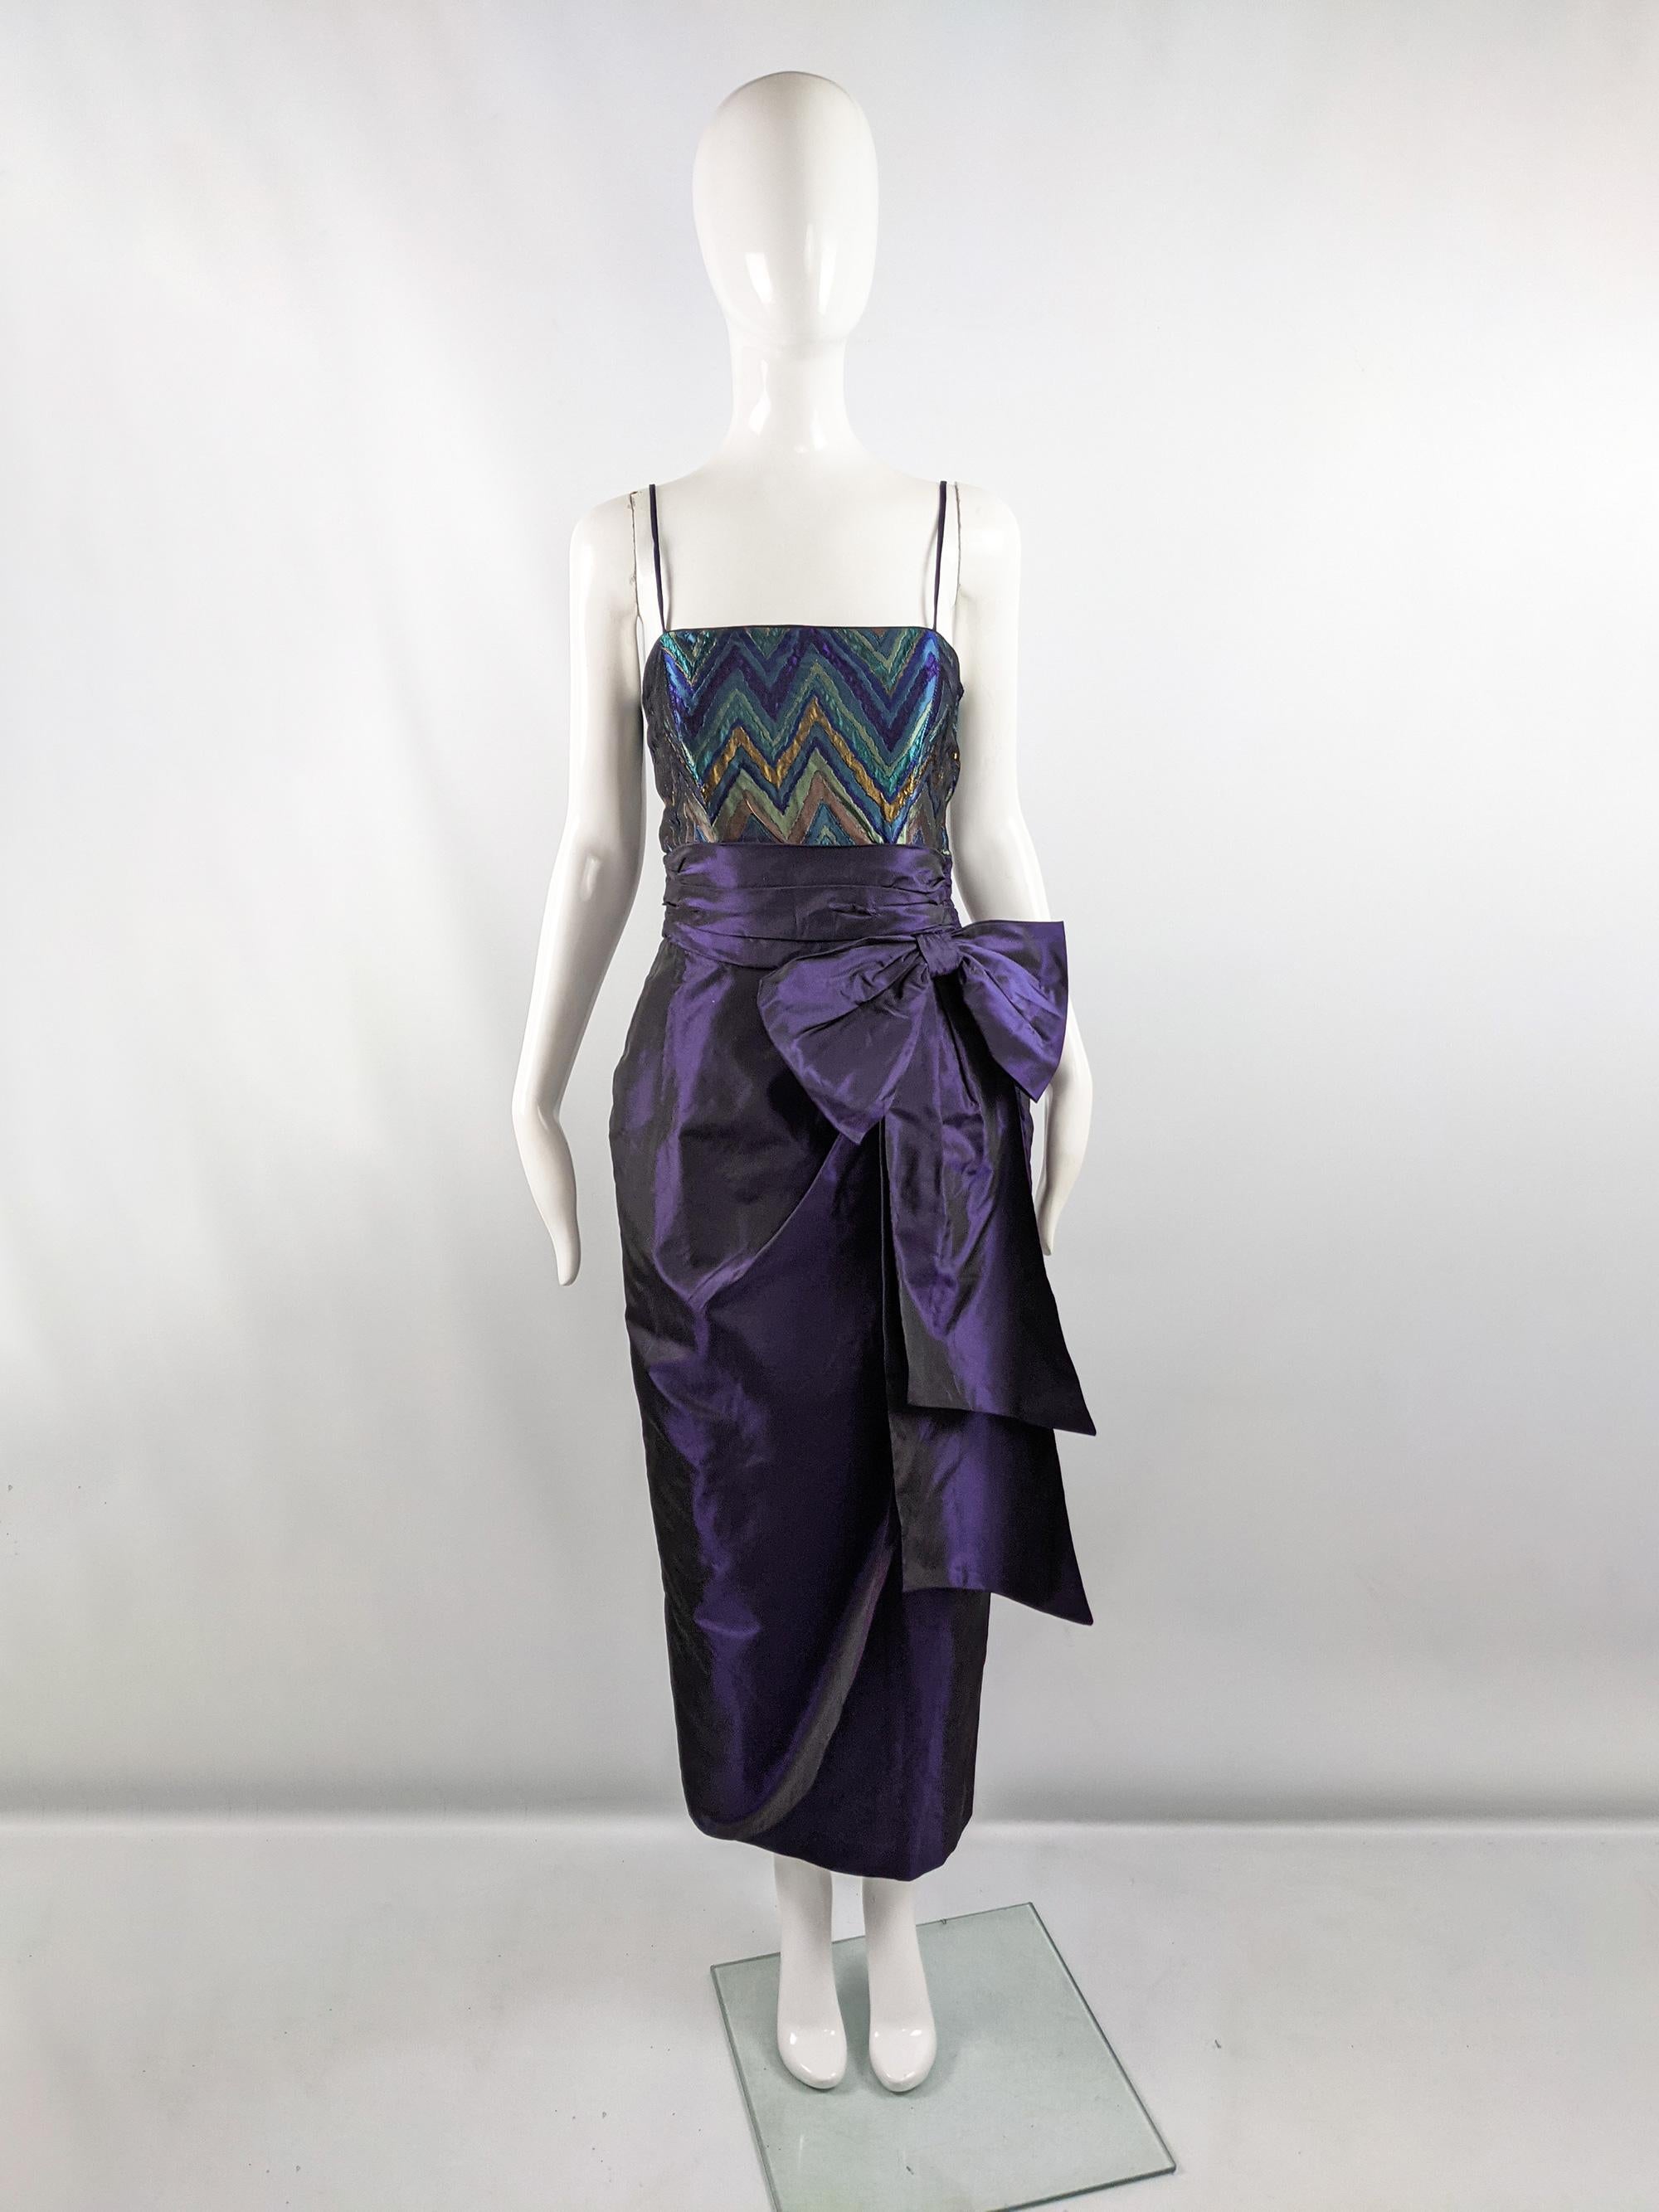 A fabulous vintage womens sleeveless maxi evening dress from the 80s by quality British fashion designer, Tessara. In a purple taffeta with a dark iridescent hue and a teal brocade fabric on top. It has a flattering ruched waist with a dramatic,